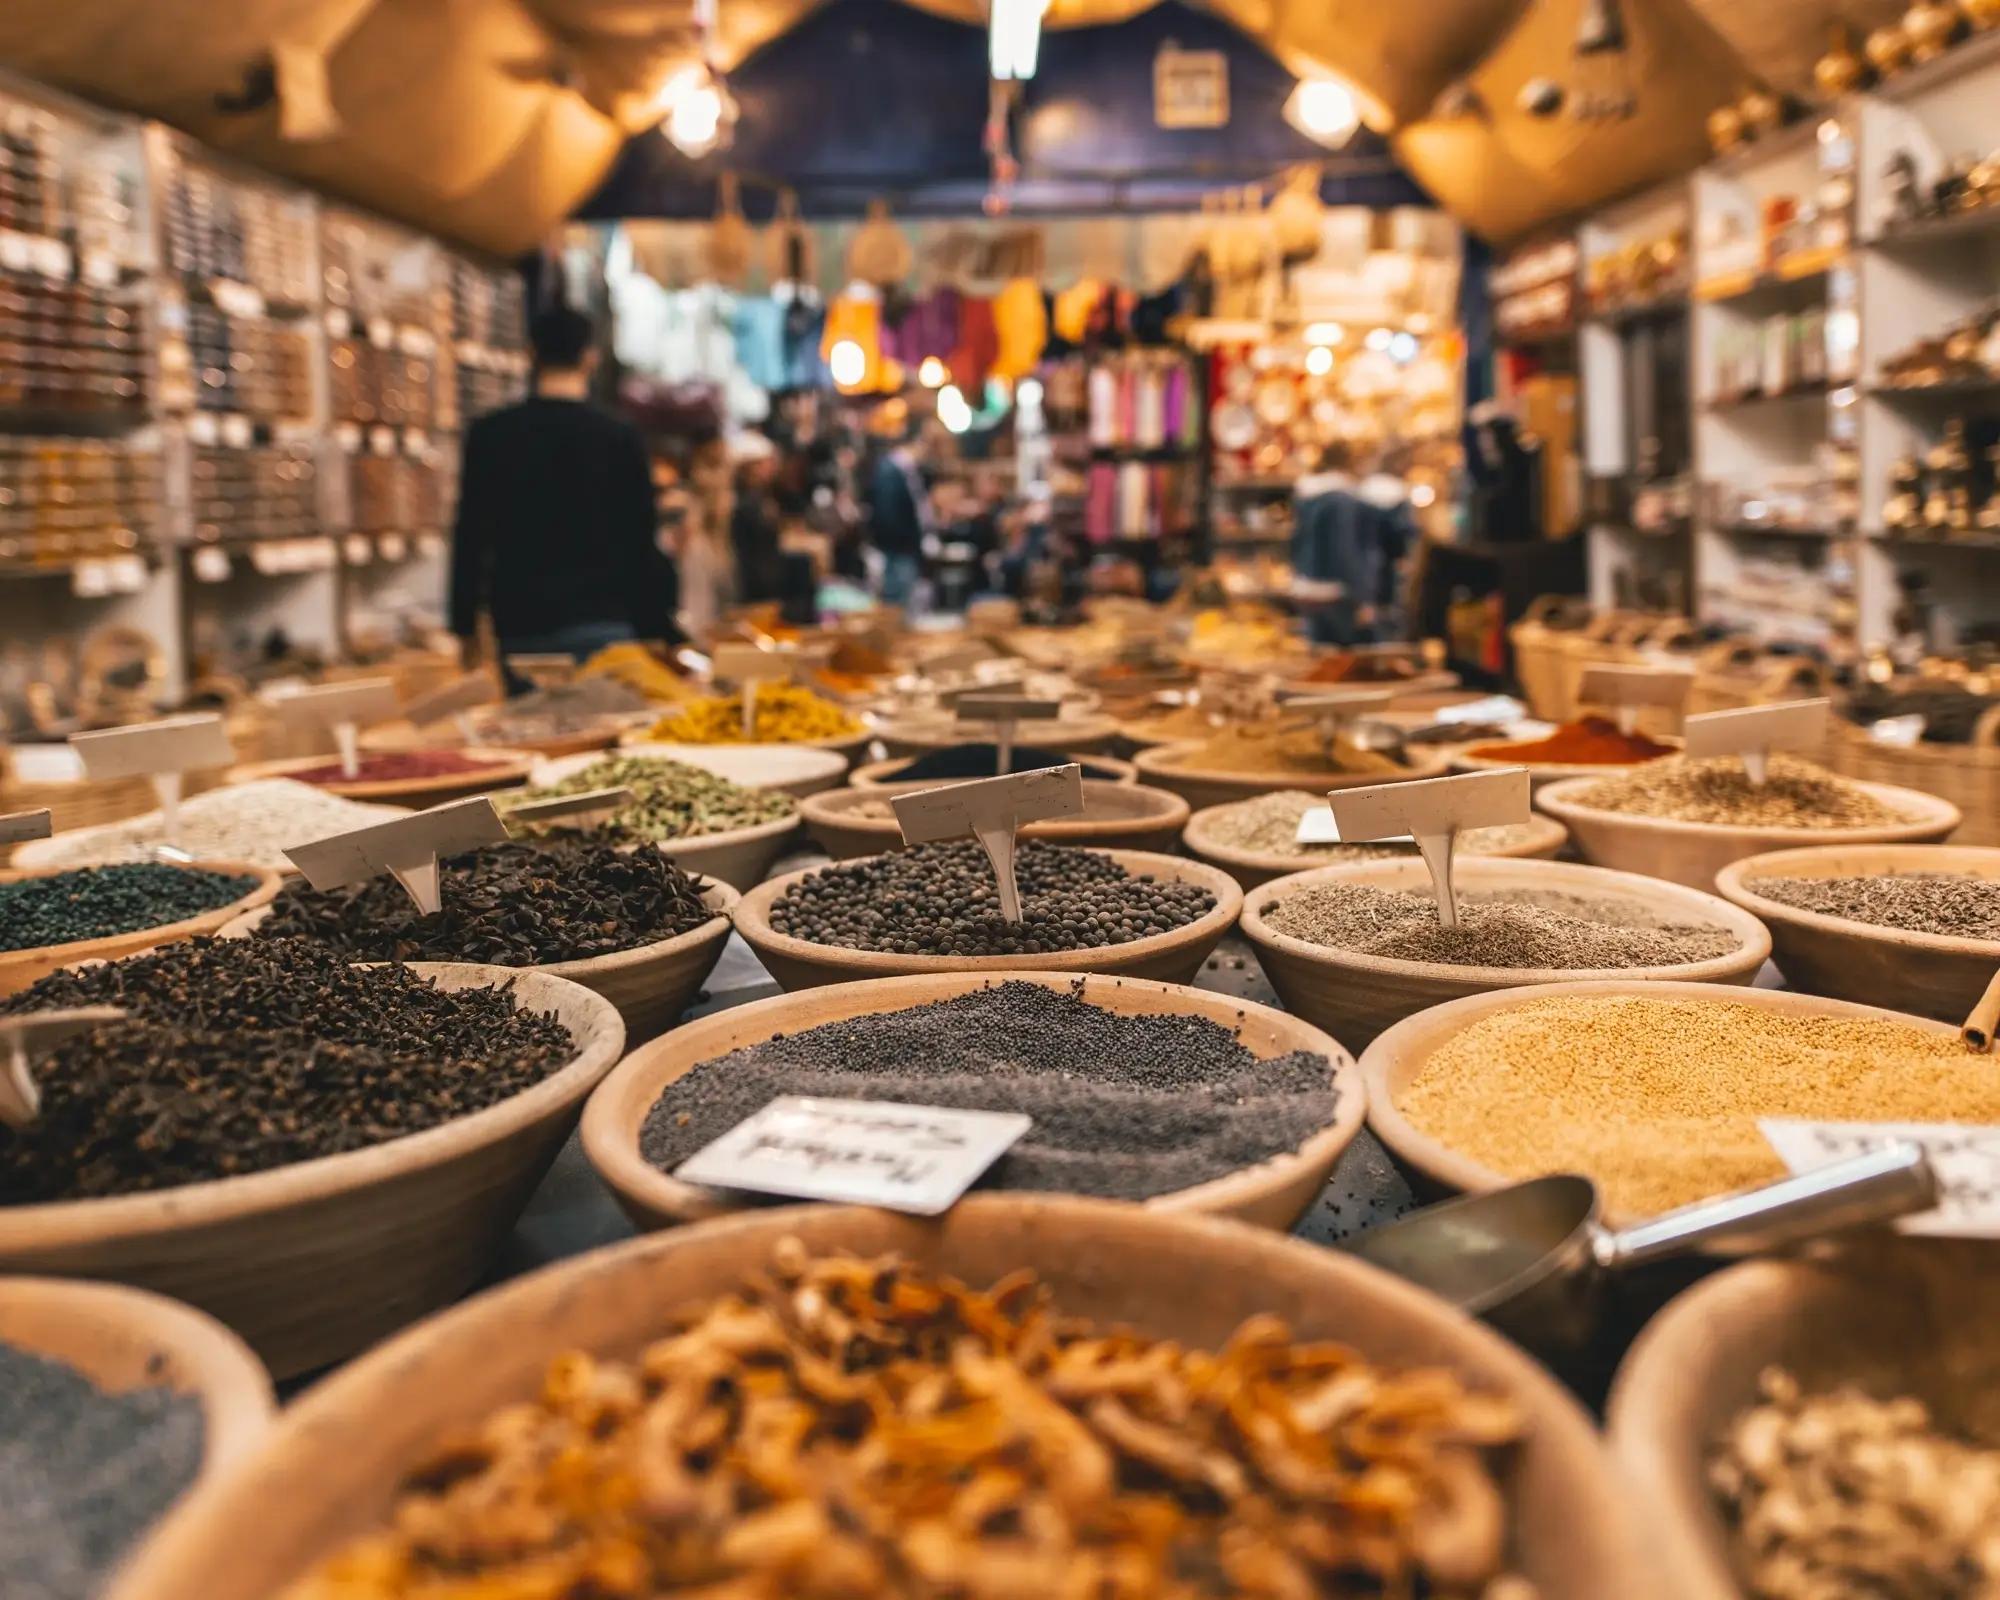 A market stall that sells different kinds of spices, representing the concept of GST input tax credits.